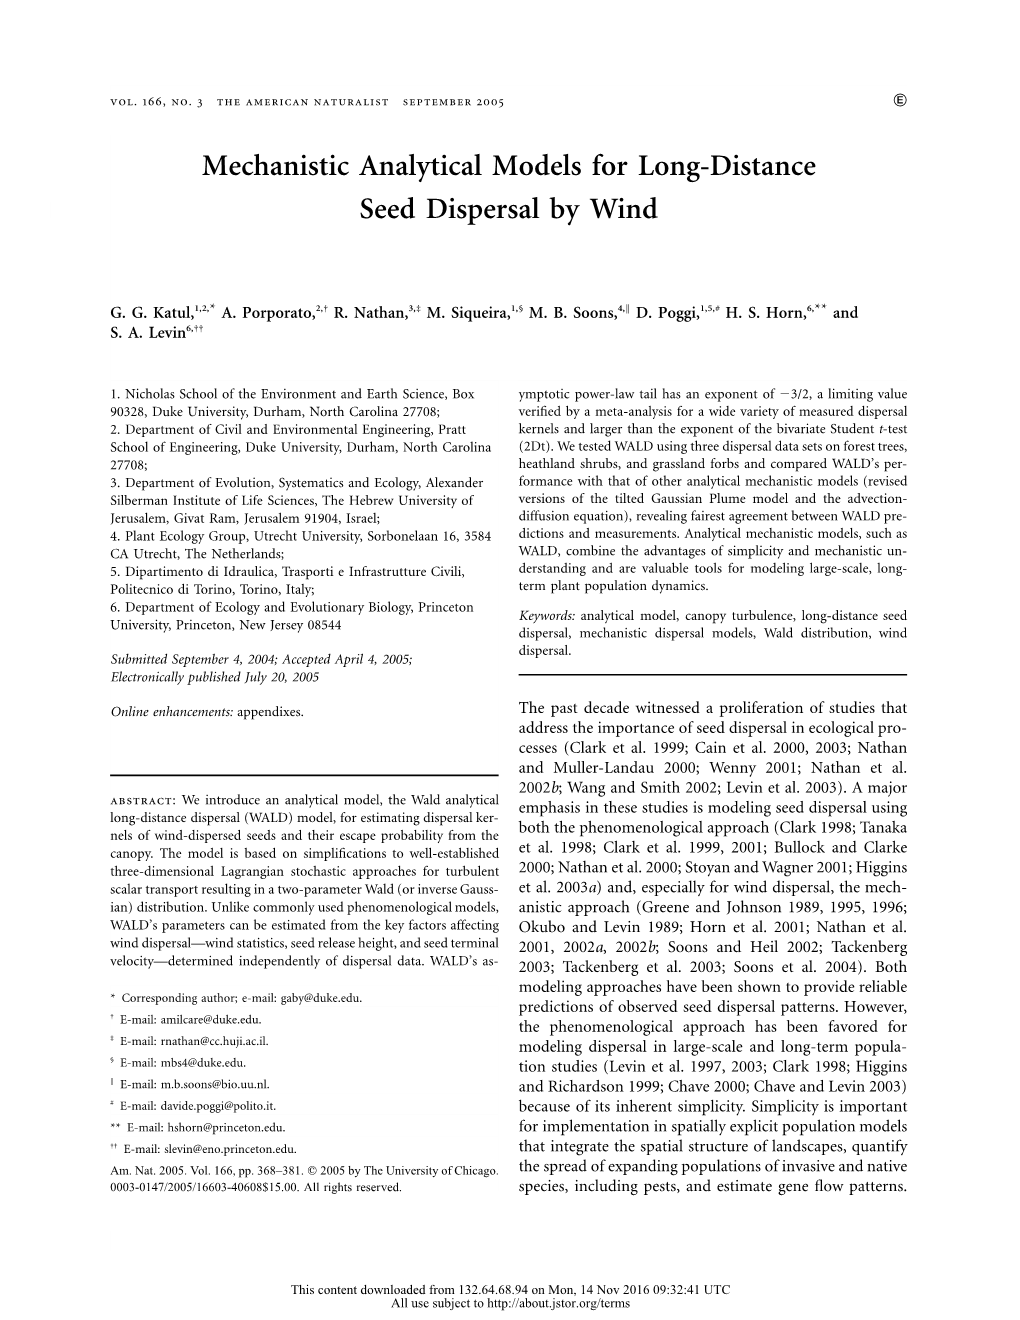 Mechanistic Analytical Models for Long-Distance Seed Dispersal by Wind